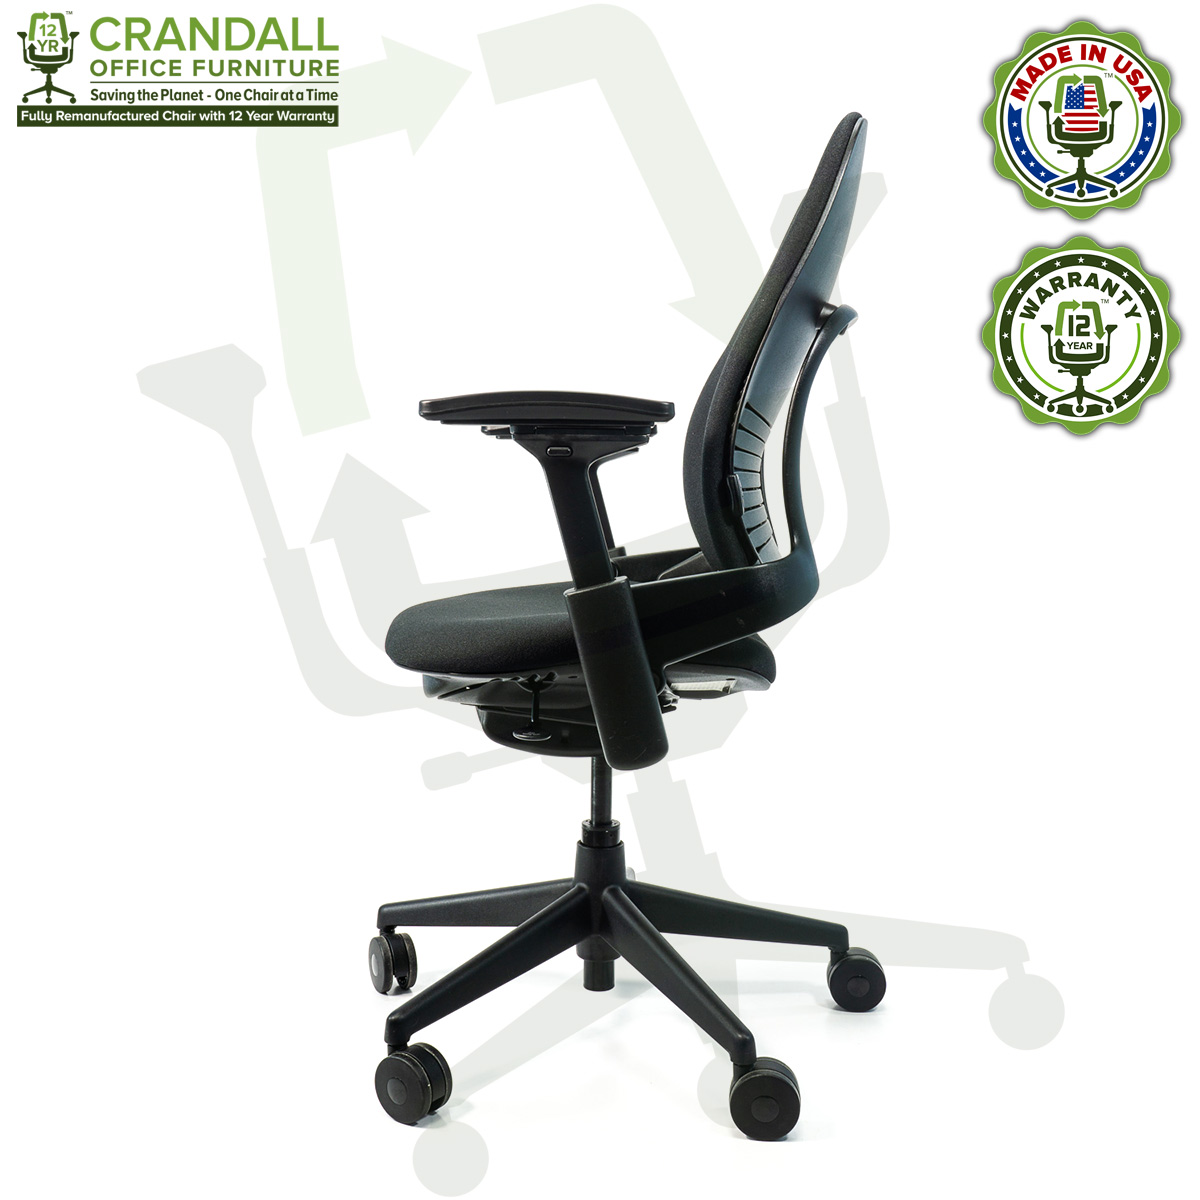 Crandall-Office-Remanufactured-Steelcase-462-V2-Leap-Chair-03